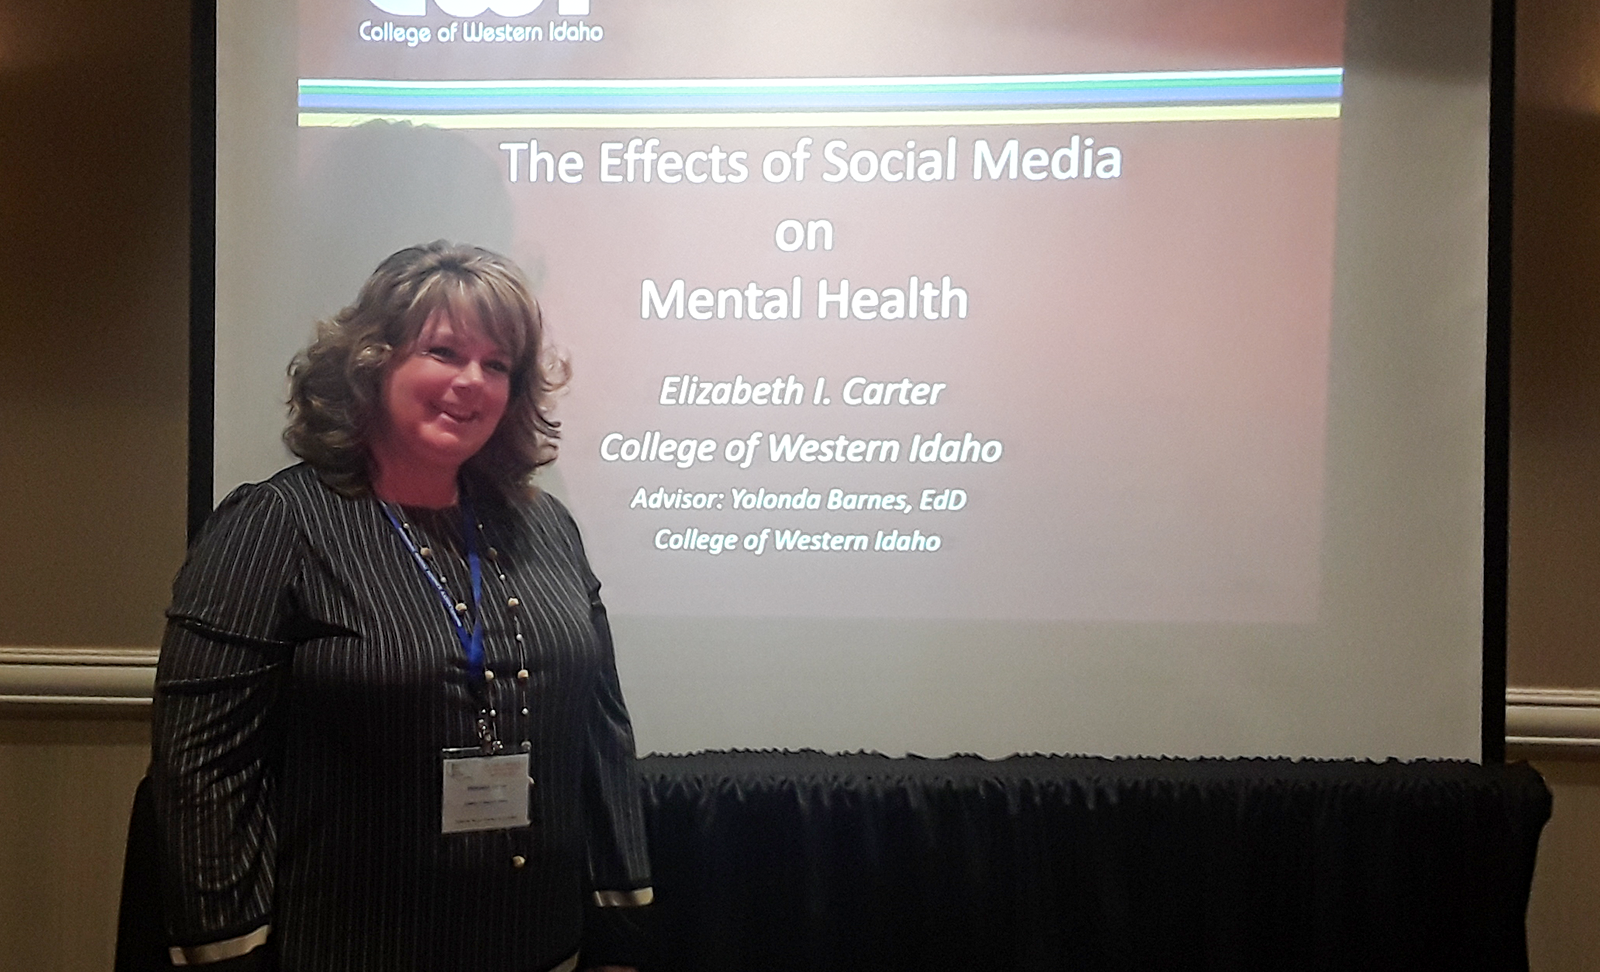 Elizabeth Carter presenting research on effects of social media on mental health